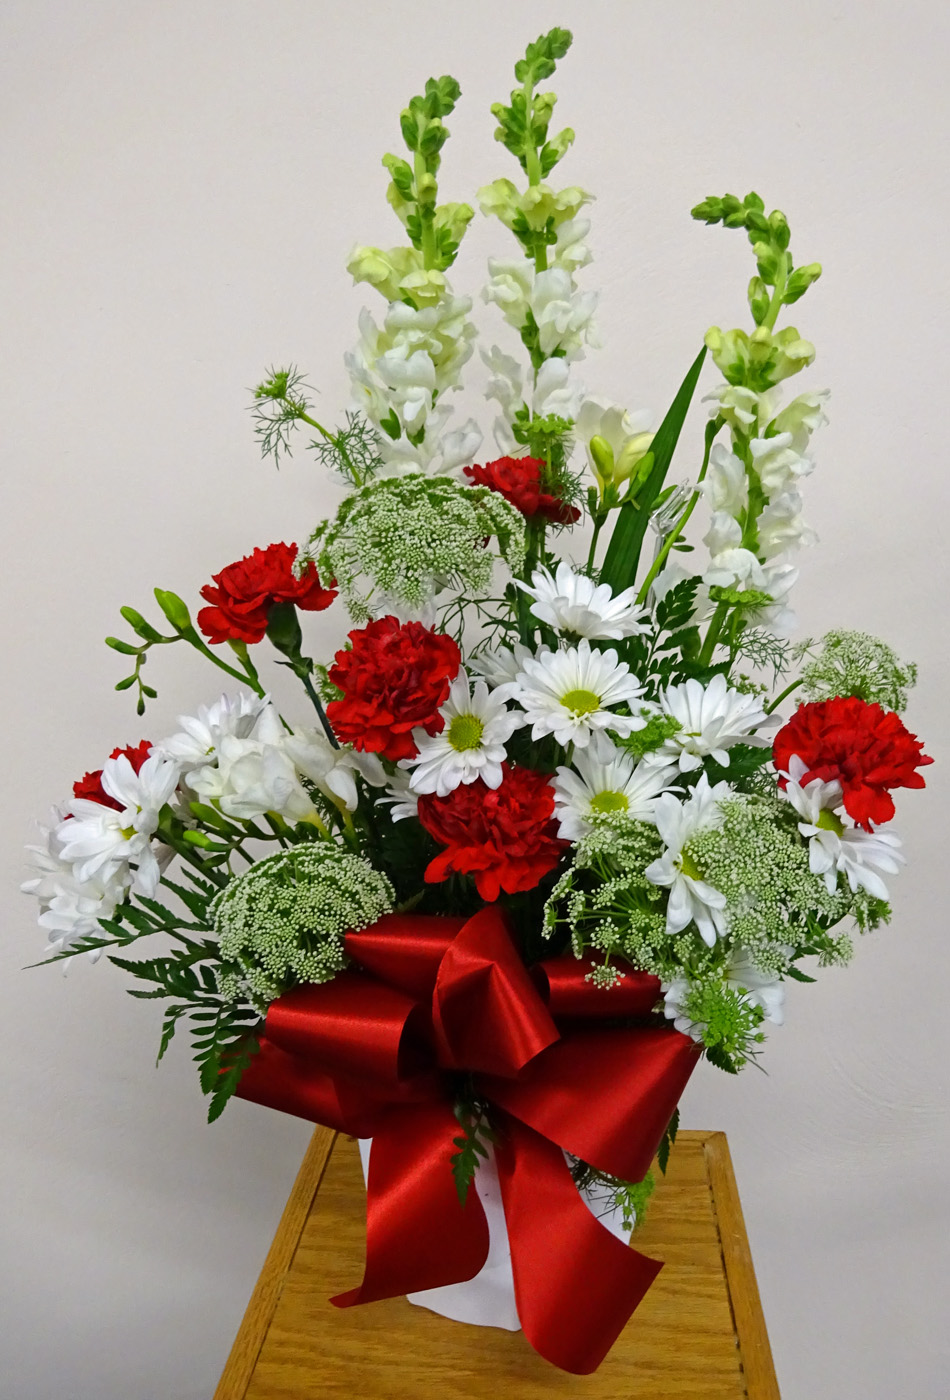 Flowers from Interior Fire Department